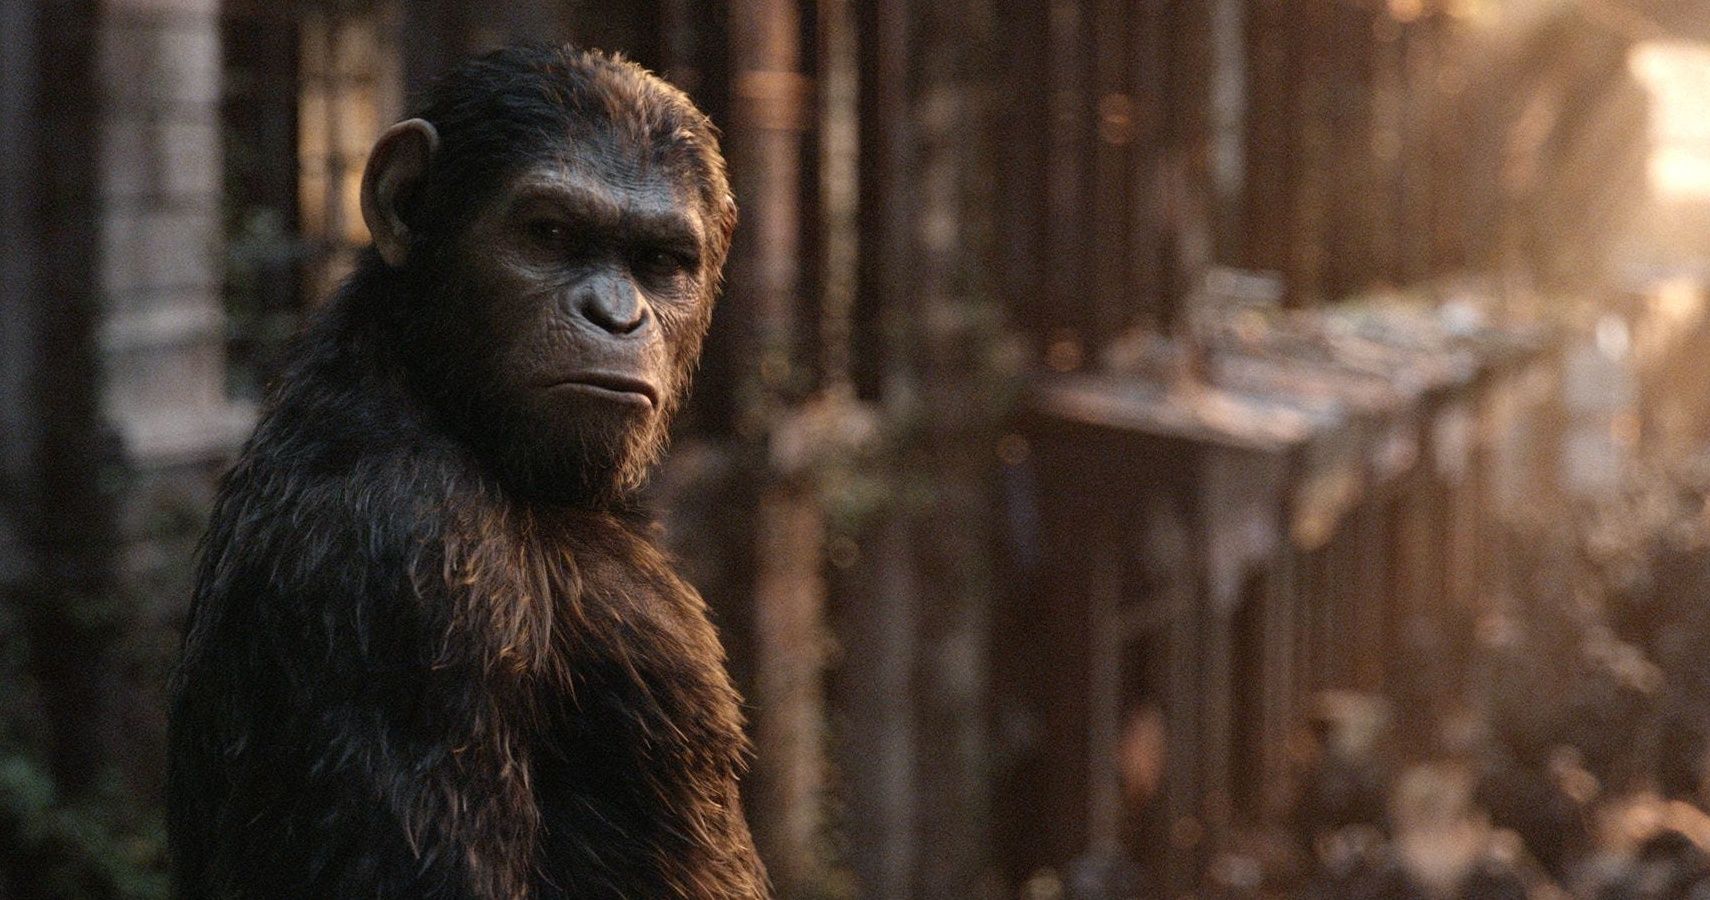 war for the planet of the apes full movie free online